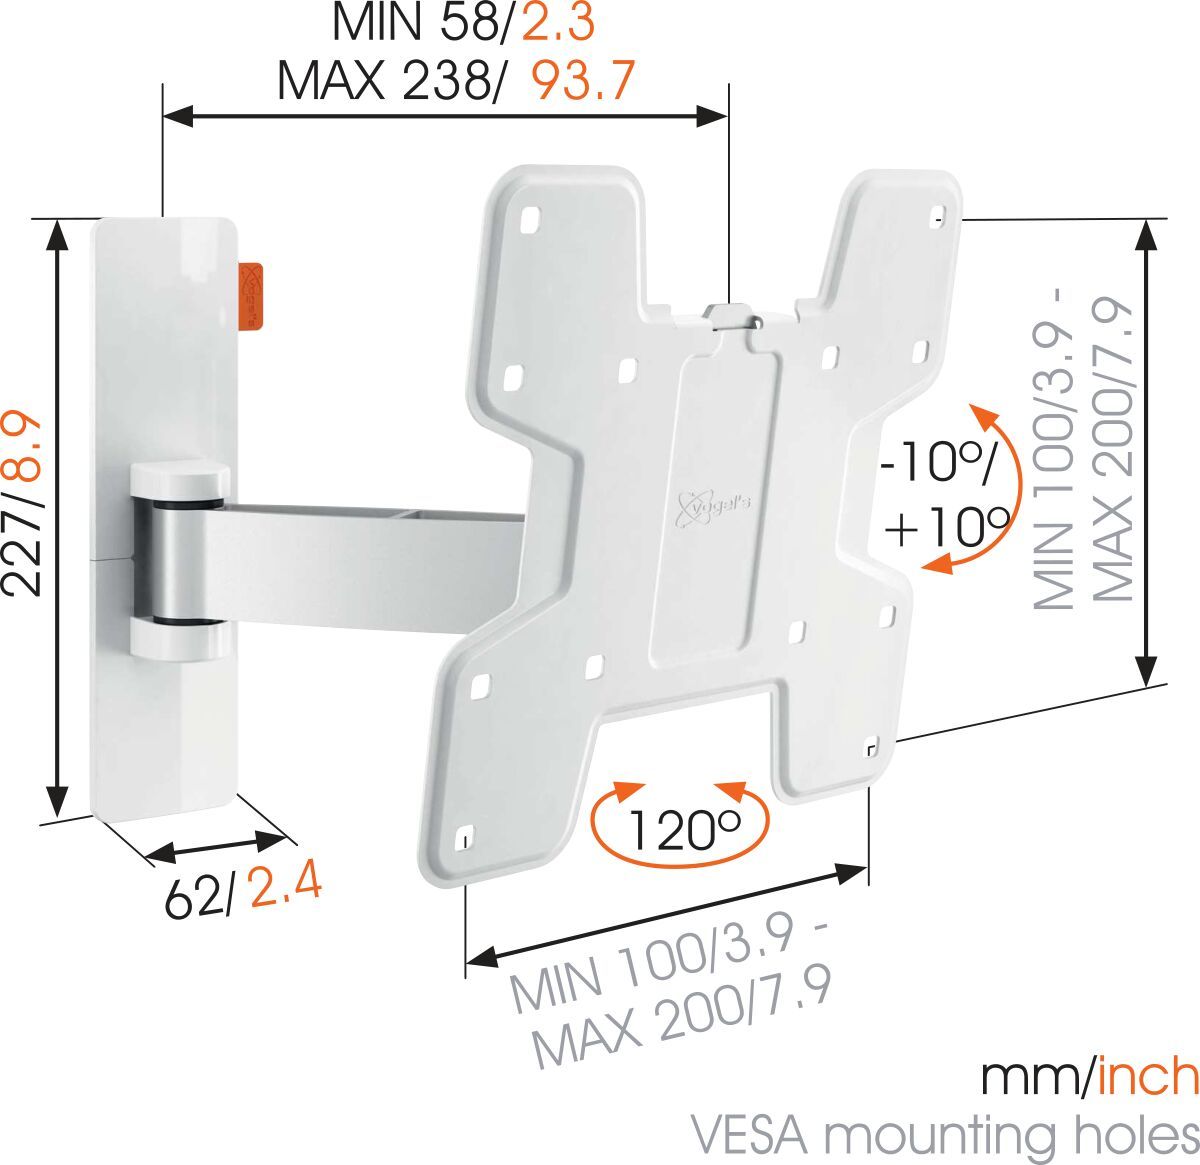 Vogel's WALL 2125 Full-Motion TV Wall Mount (white) - Suitable for 19 up to 40 inch TVs - Motion (up to 120°) - Tilt -10°/+10° - Dimensions